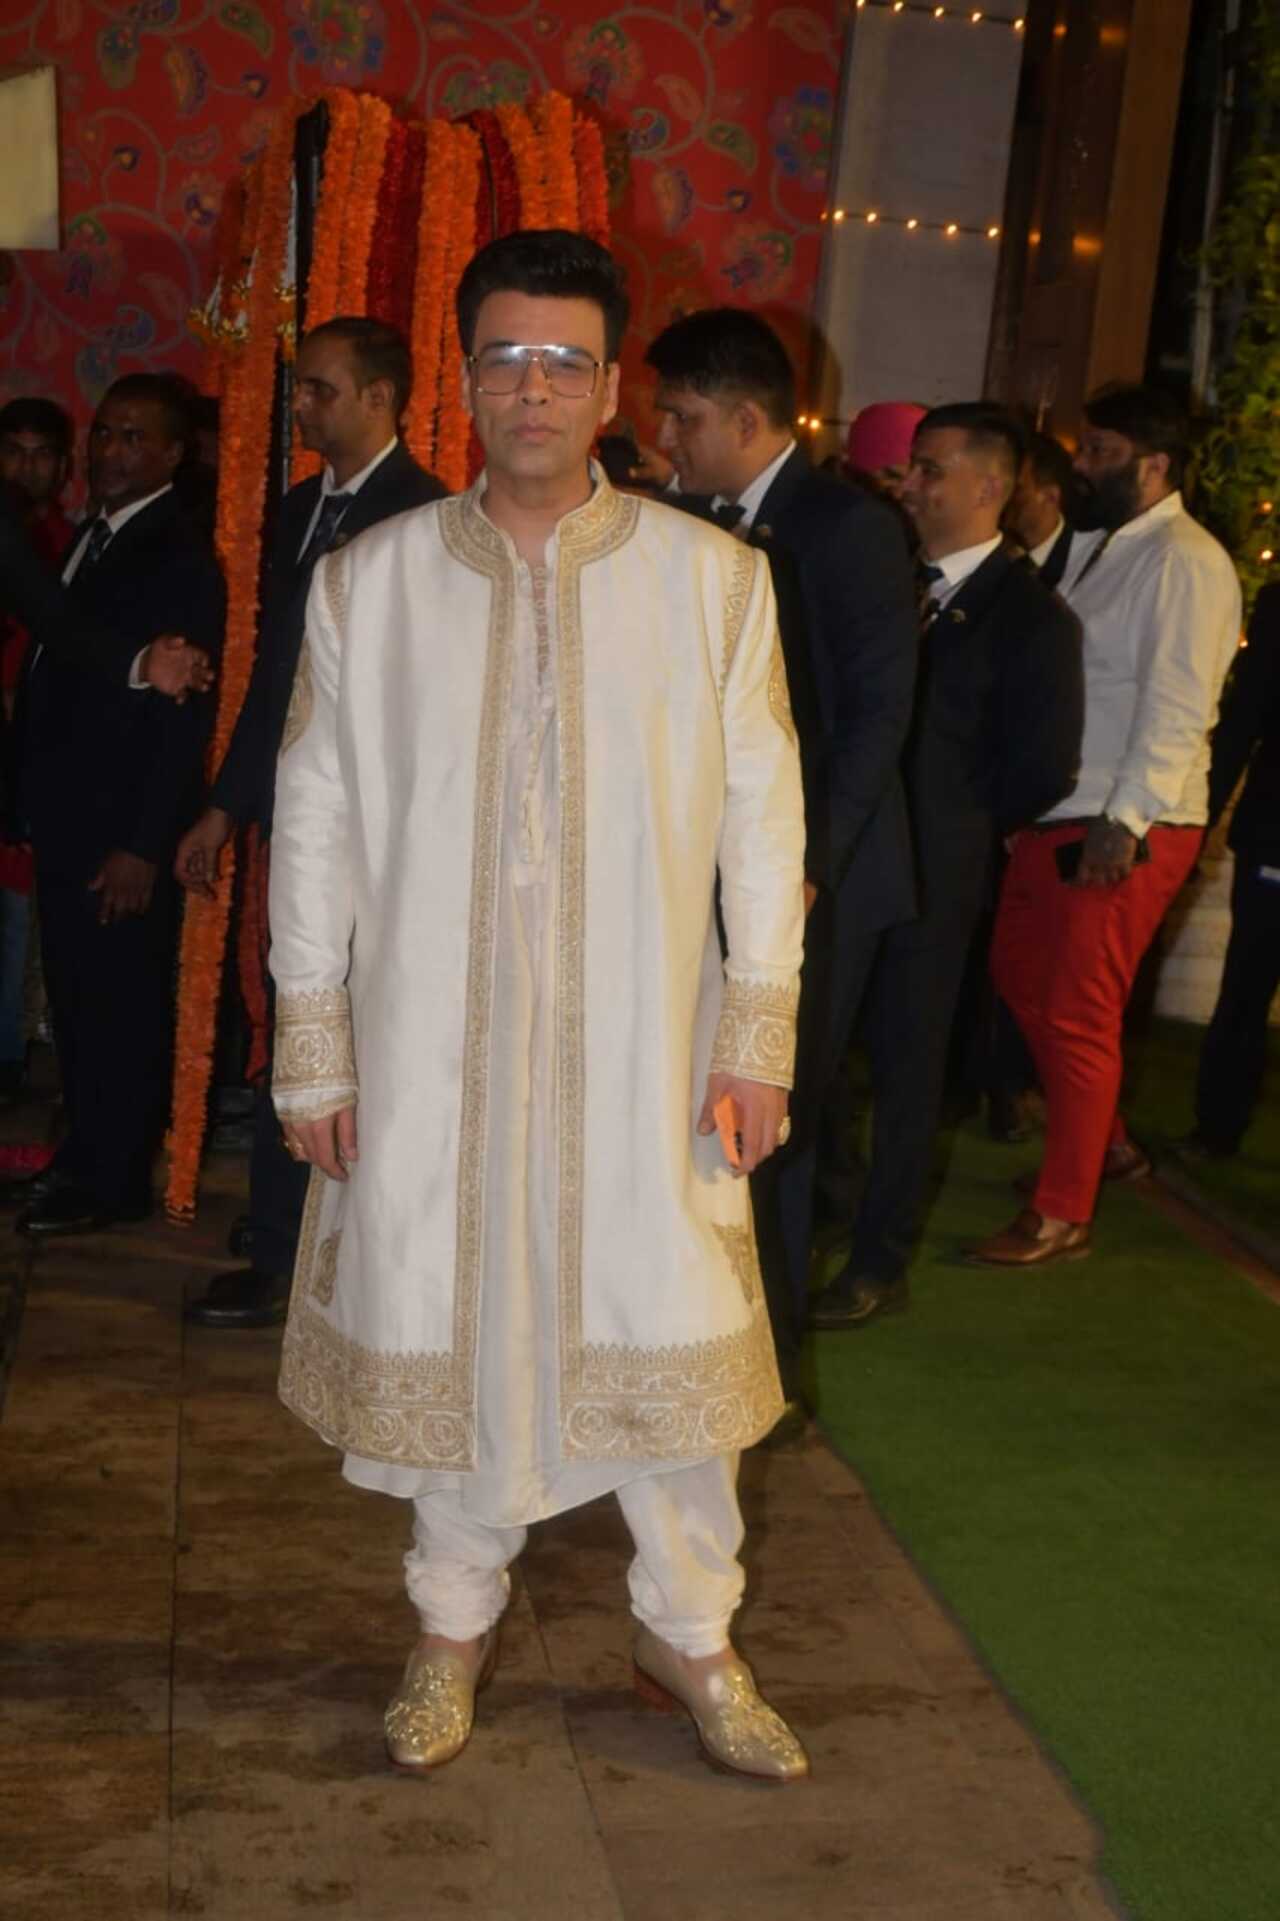 Karan Johar looked dapper in a white sherwani. He posed for the cameras happily